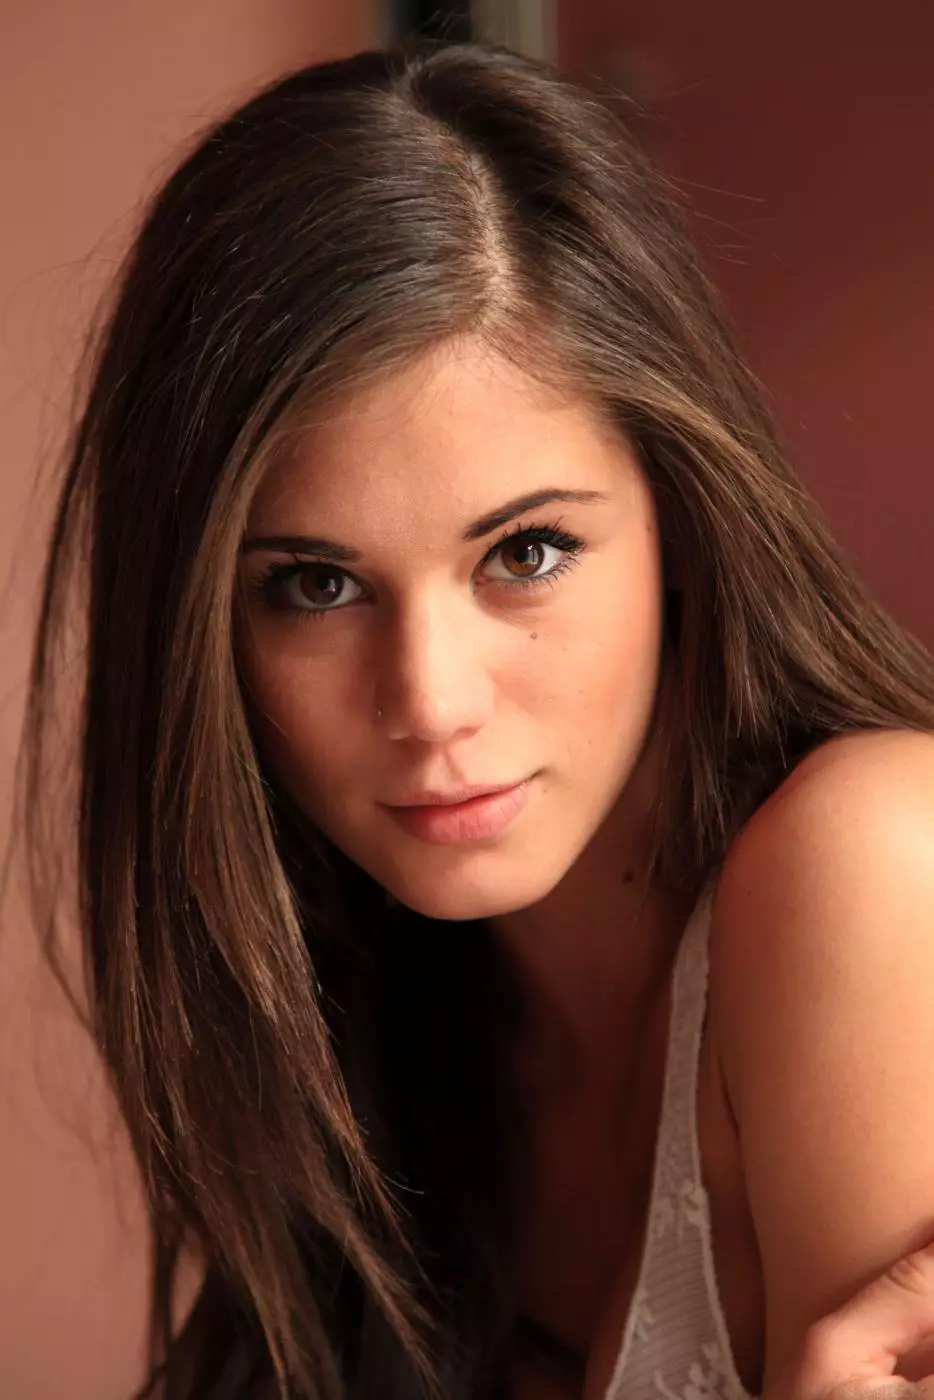 Pretty babe Little Caprice spreads her smooth legs and shows off her juicy cunt